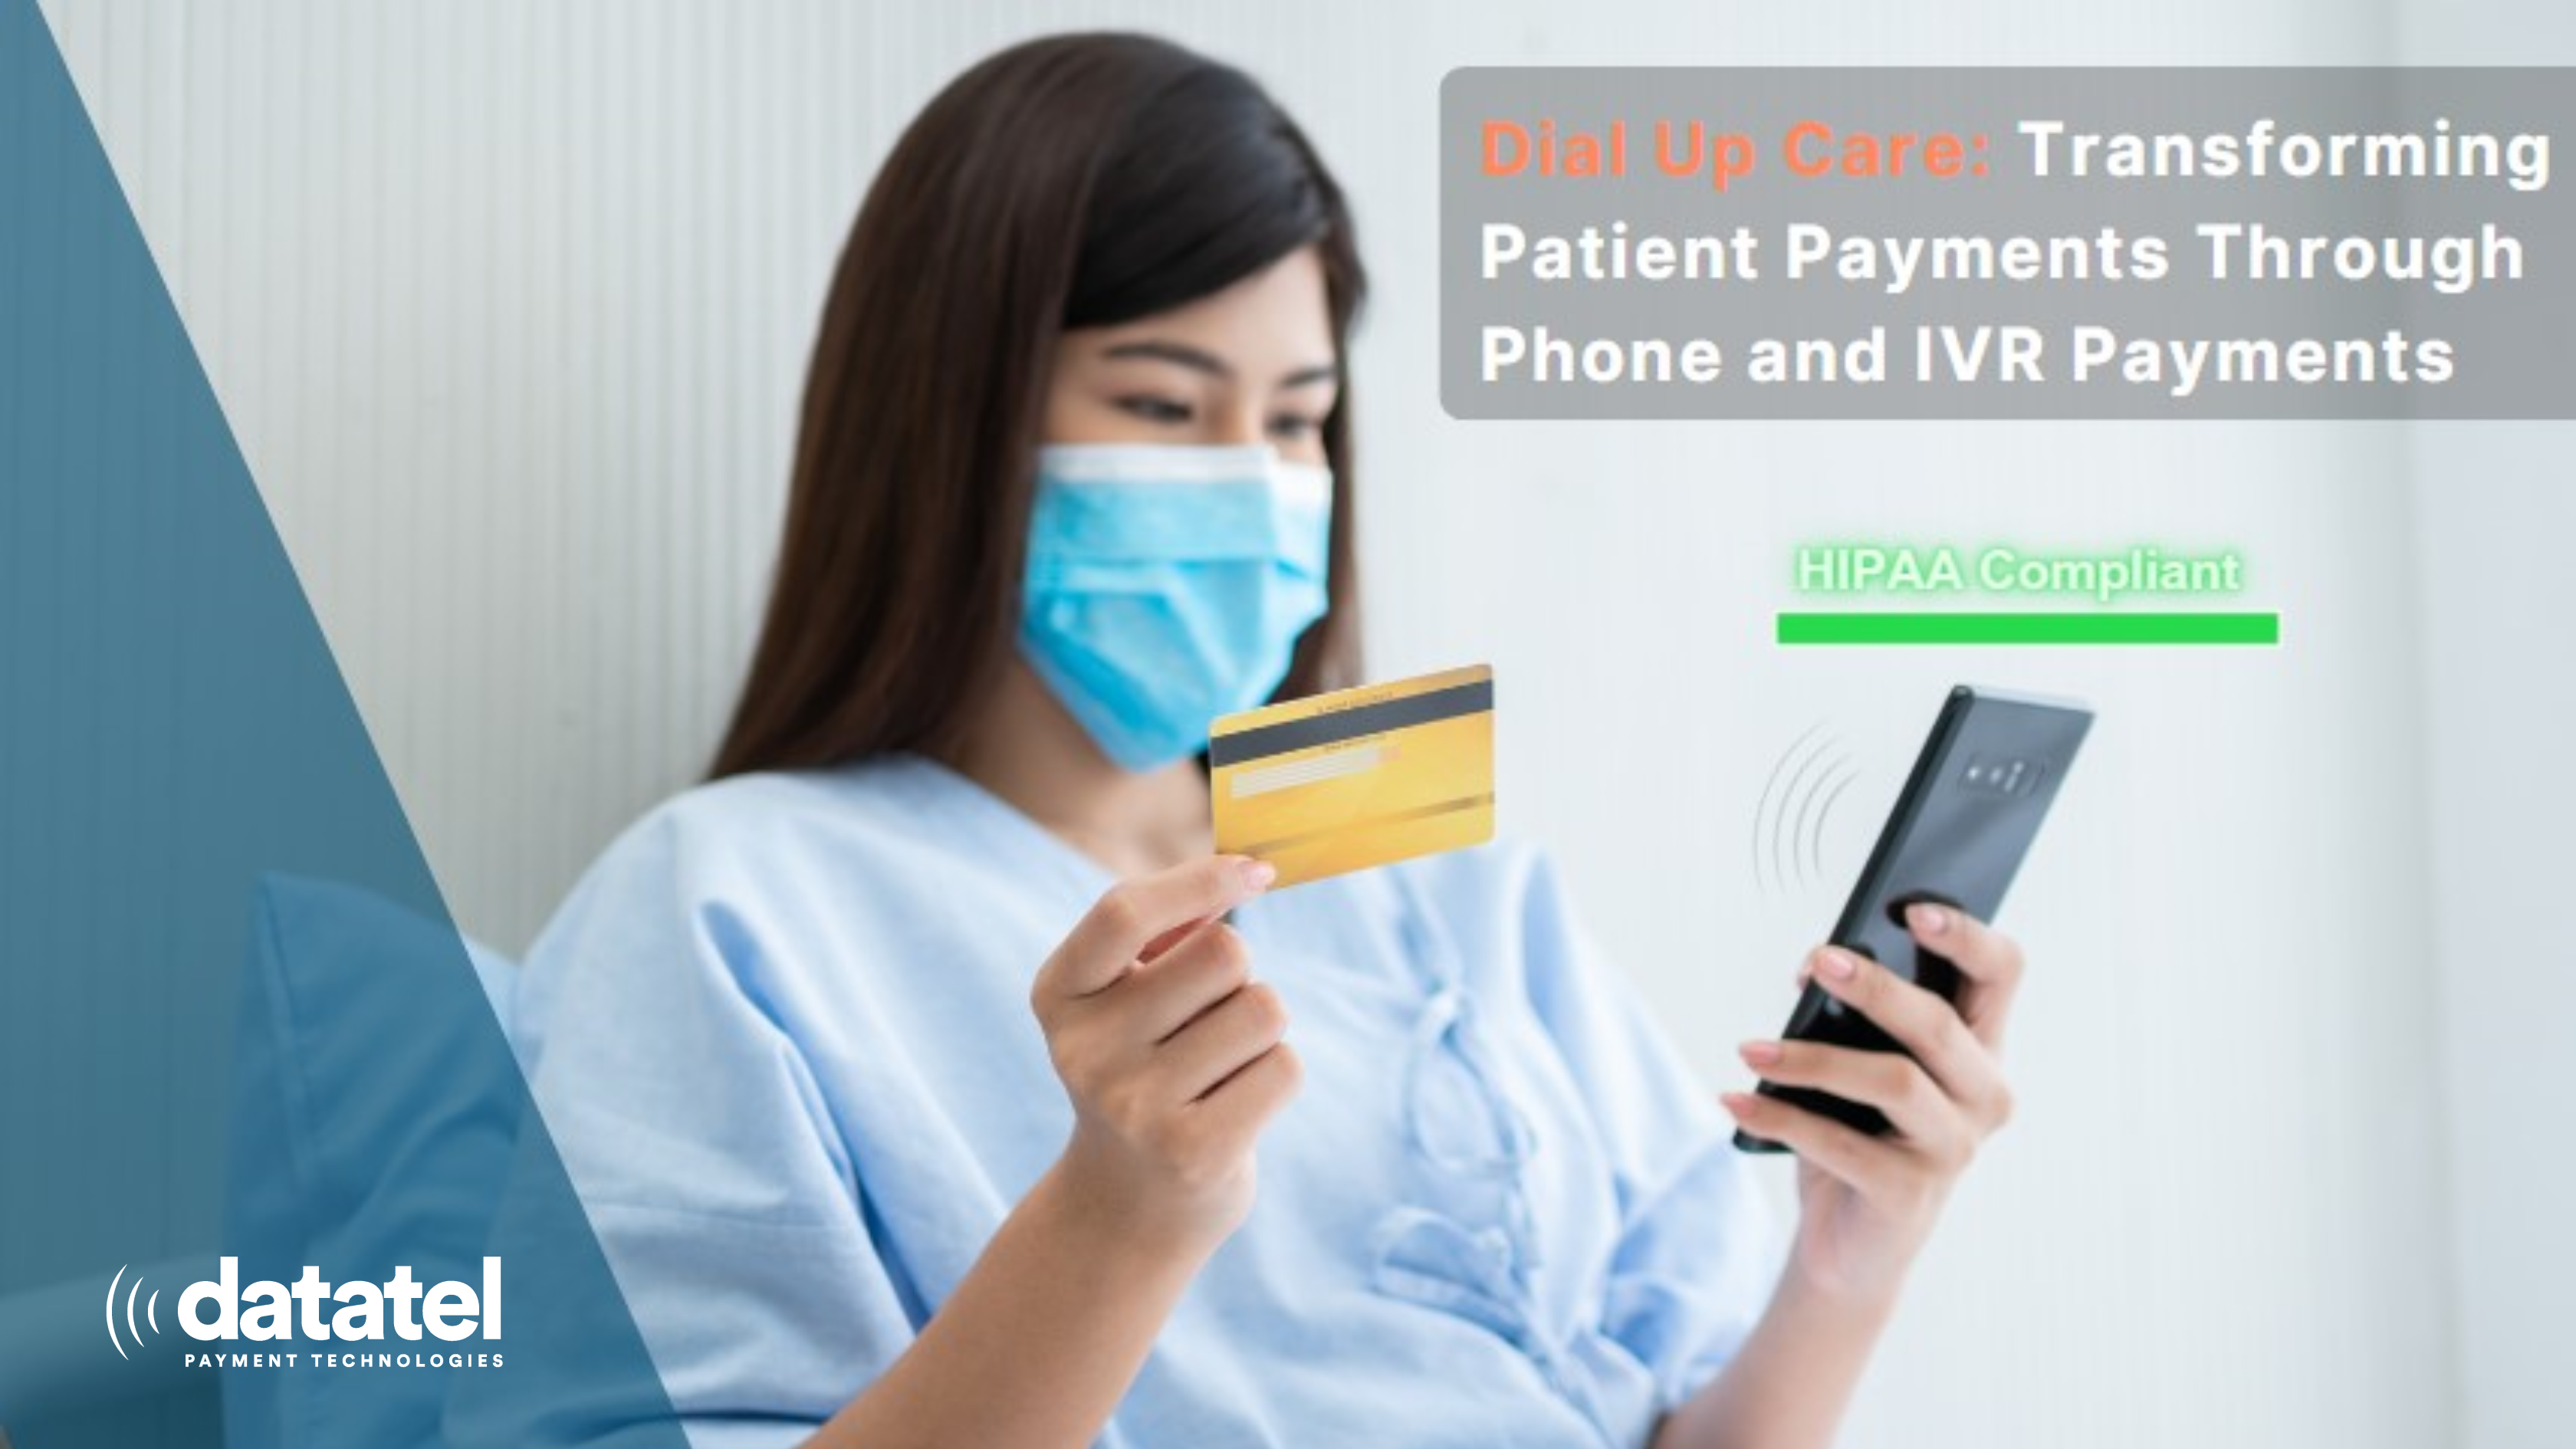 Dial Up Care: Transforming Patient Payments Through Phone and IVR Payments